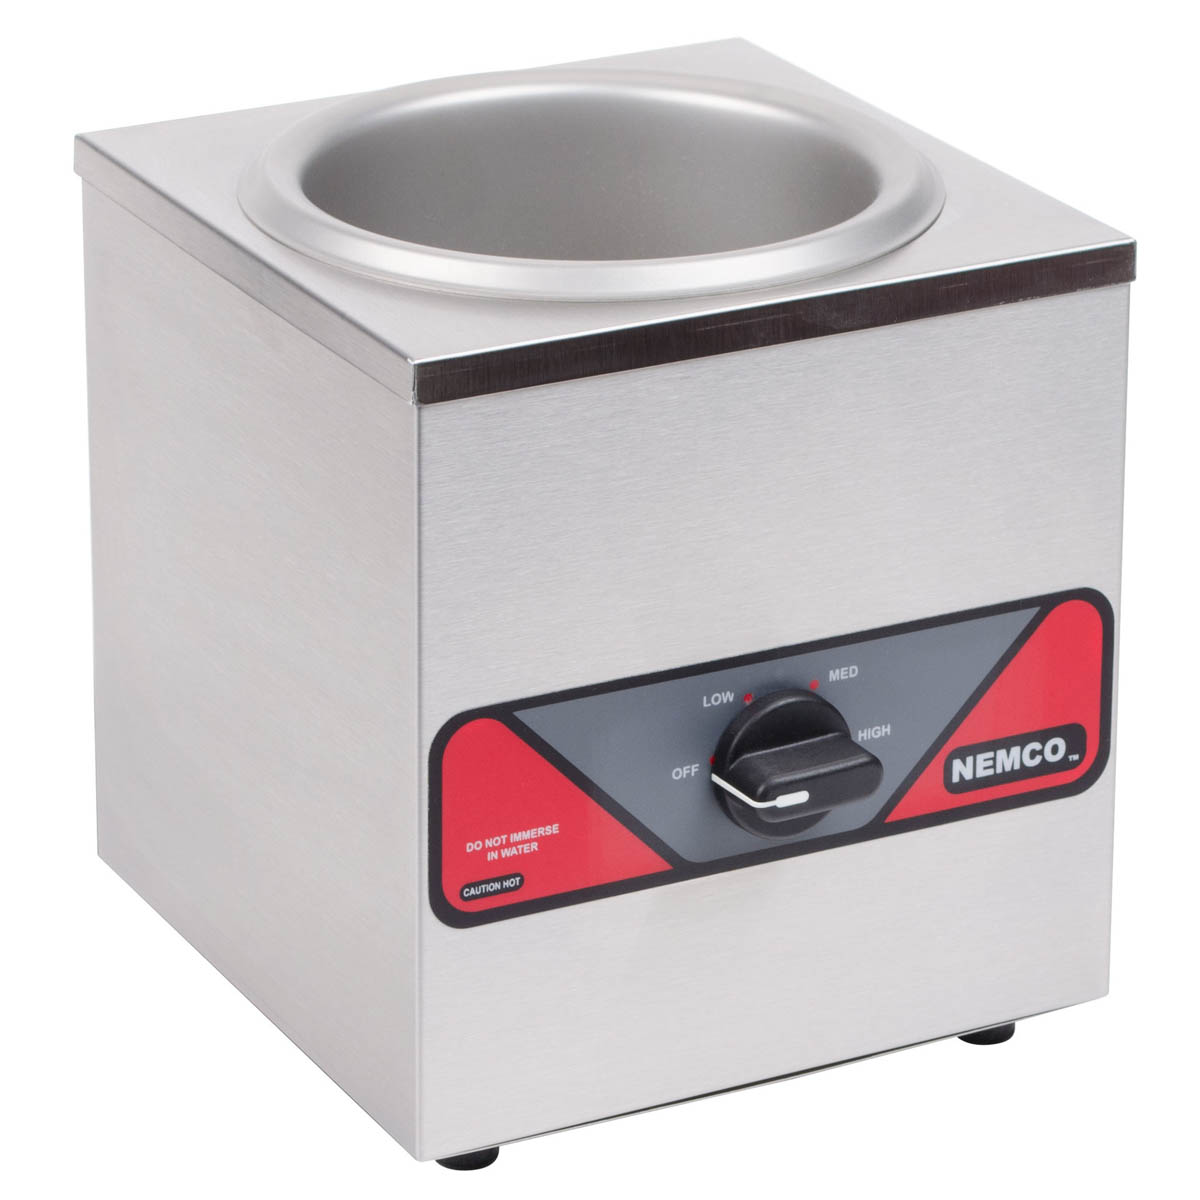 Nemco 6110A-220 Countertop Food Pan Warmer w/ 4-Qt. Capacity, Adjustable Thermostat, 1 Well